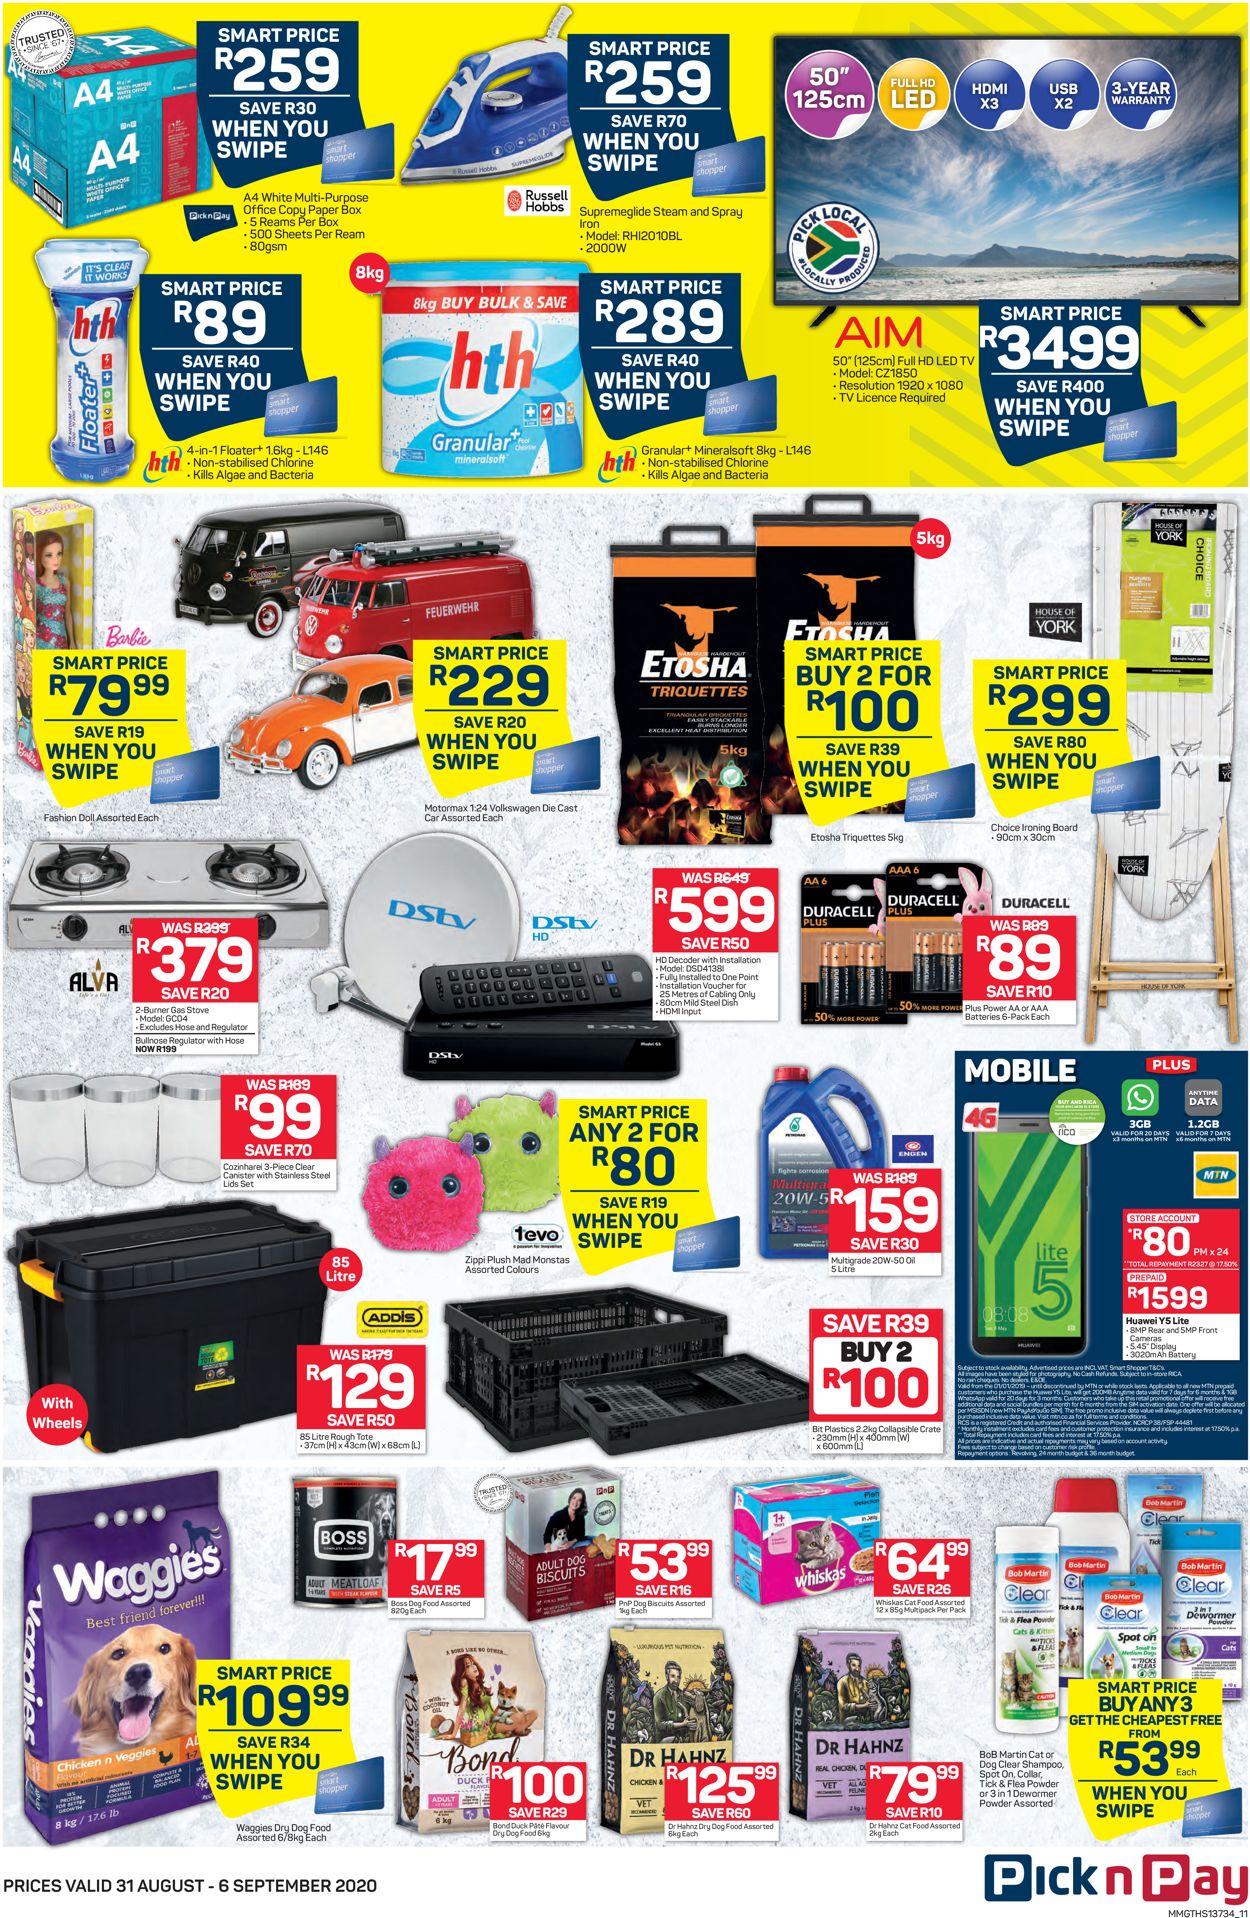 Pick n Pay Catalogue - 2020/08/31-2020/09/06 (Page 11)